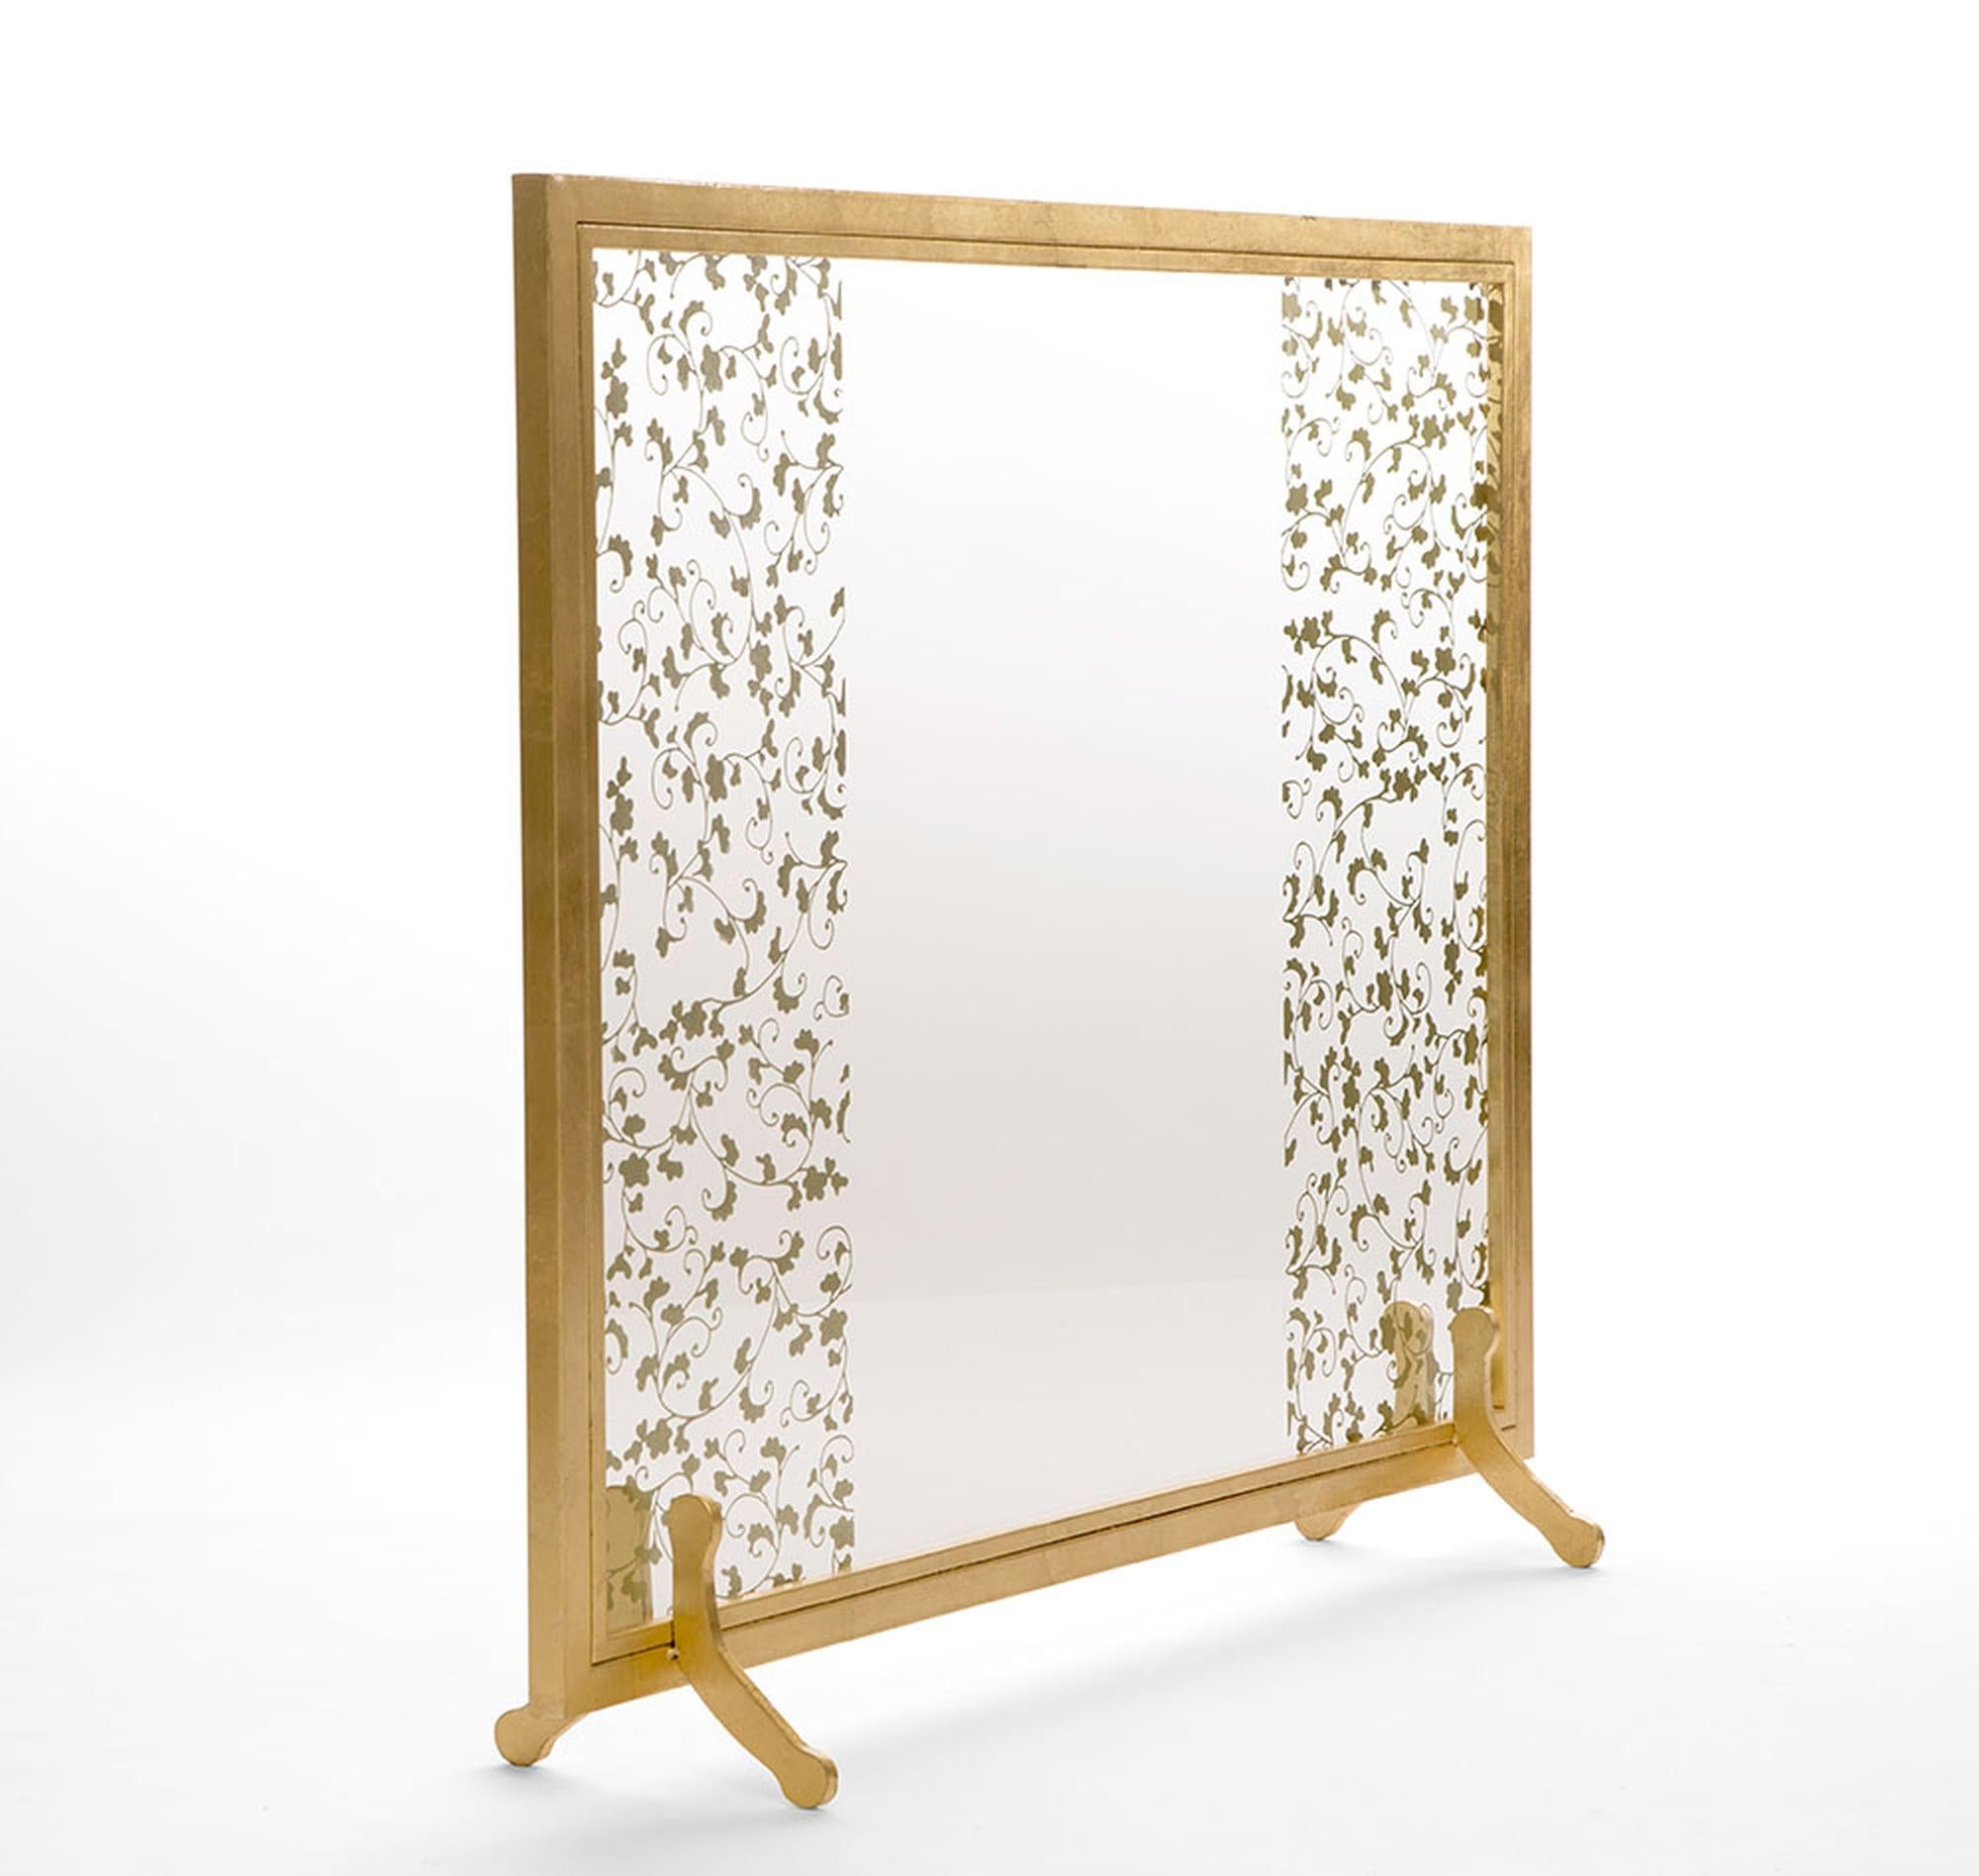 The Astaire fireplace screen complements the design and aesthetic of the Astaire collection, with its delicate and ornate detailing. A hand-embellished floral design is placed on a tempered glass panel, and a hand gilded metal frame supports the